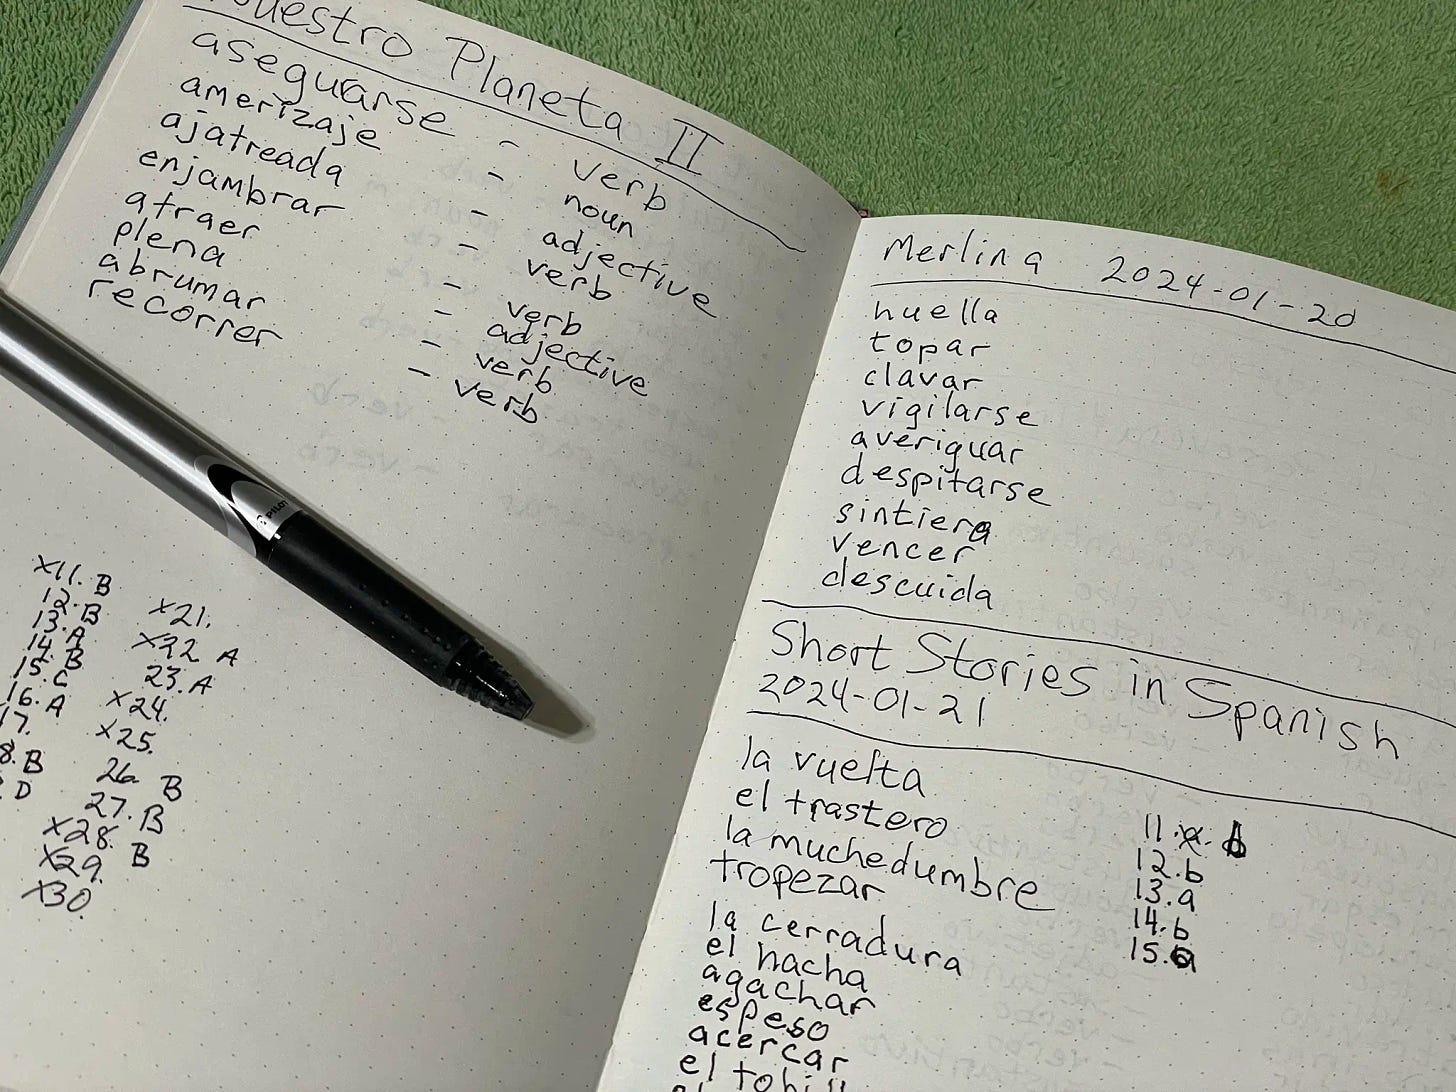 An image of an open notebook with lists of Spanis words on both page and a pen laid horizontally across the middle of the left page.